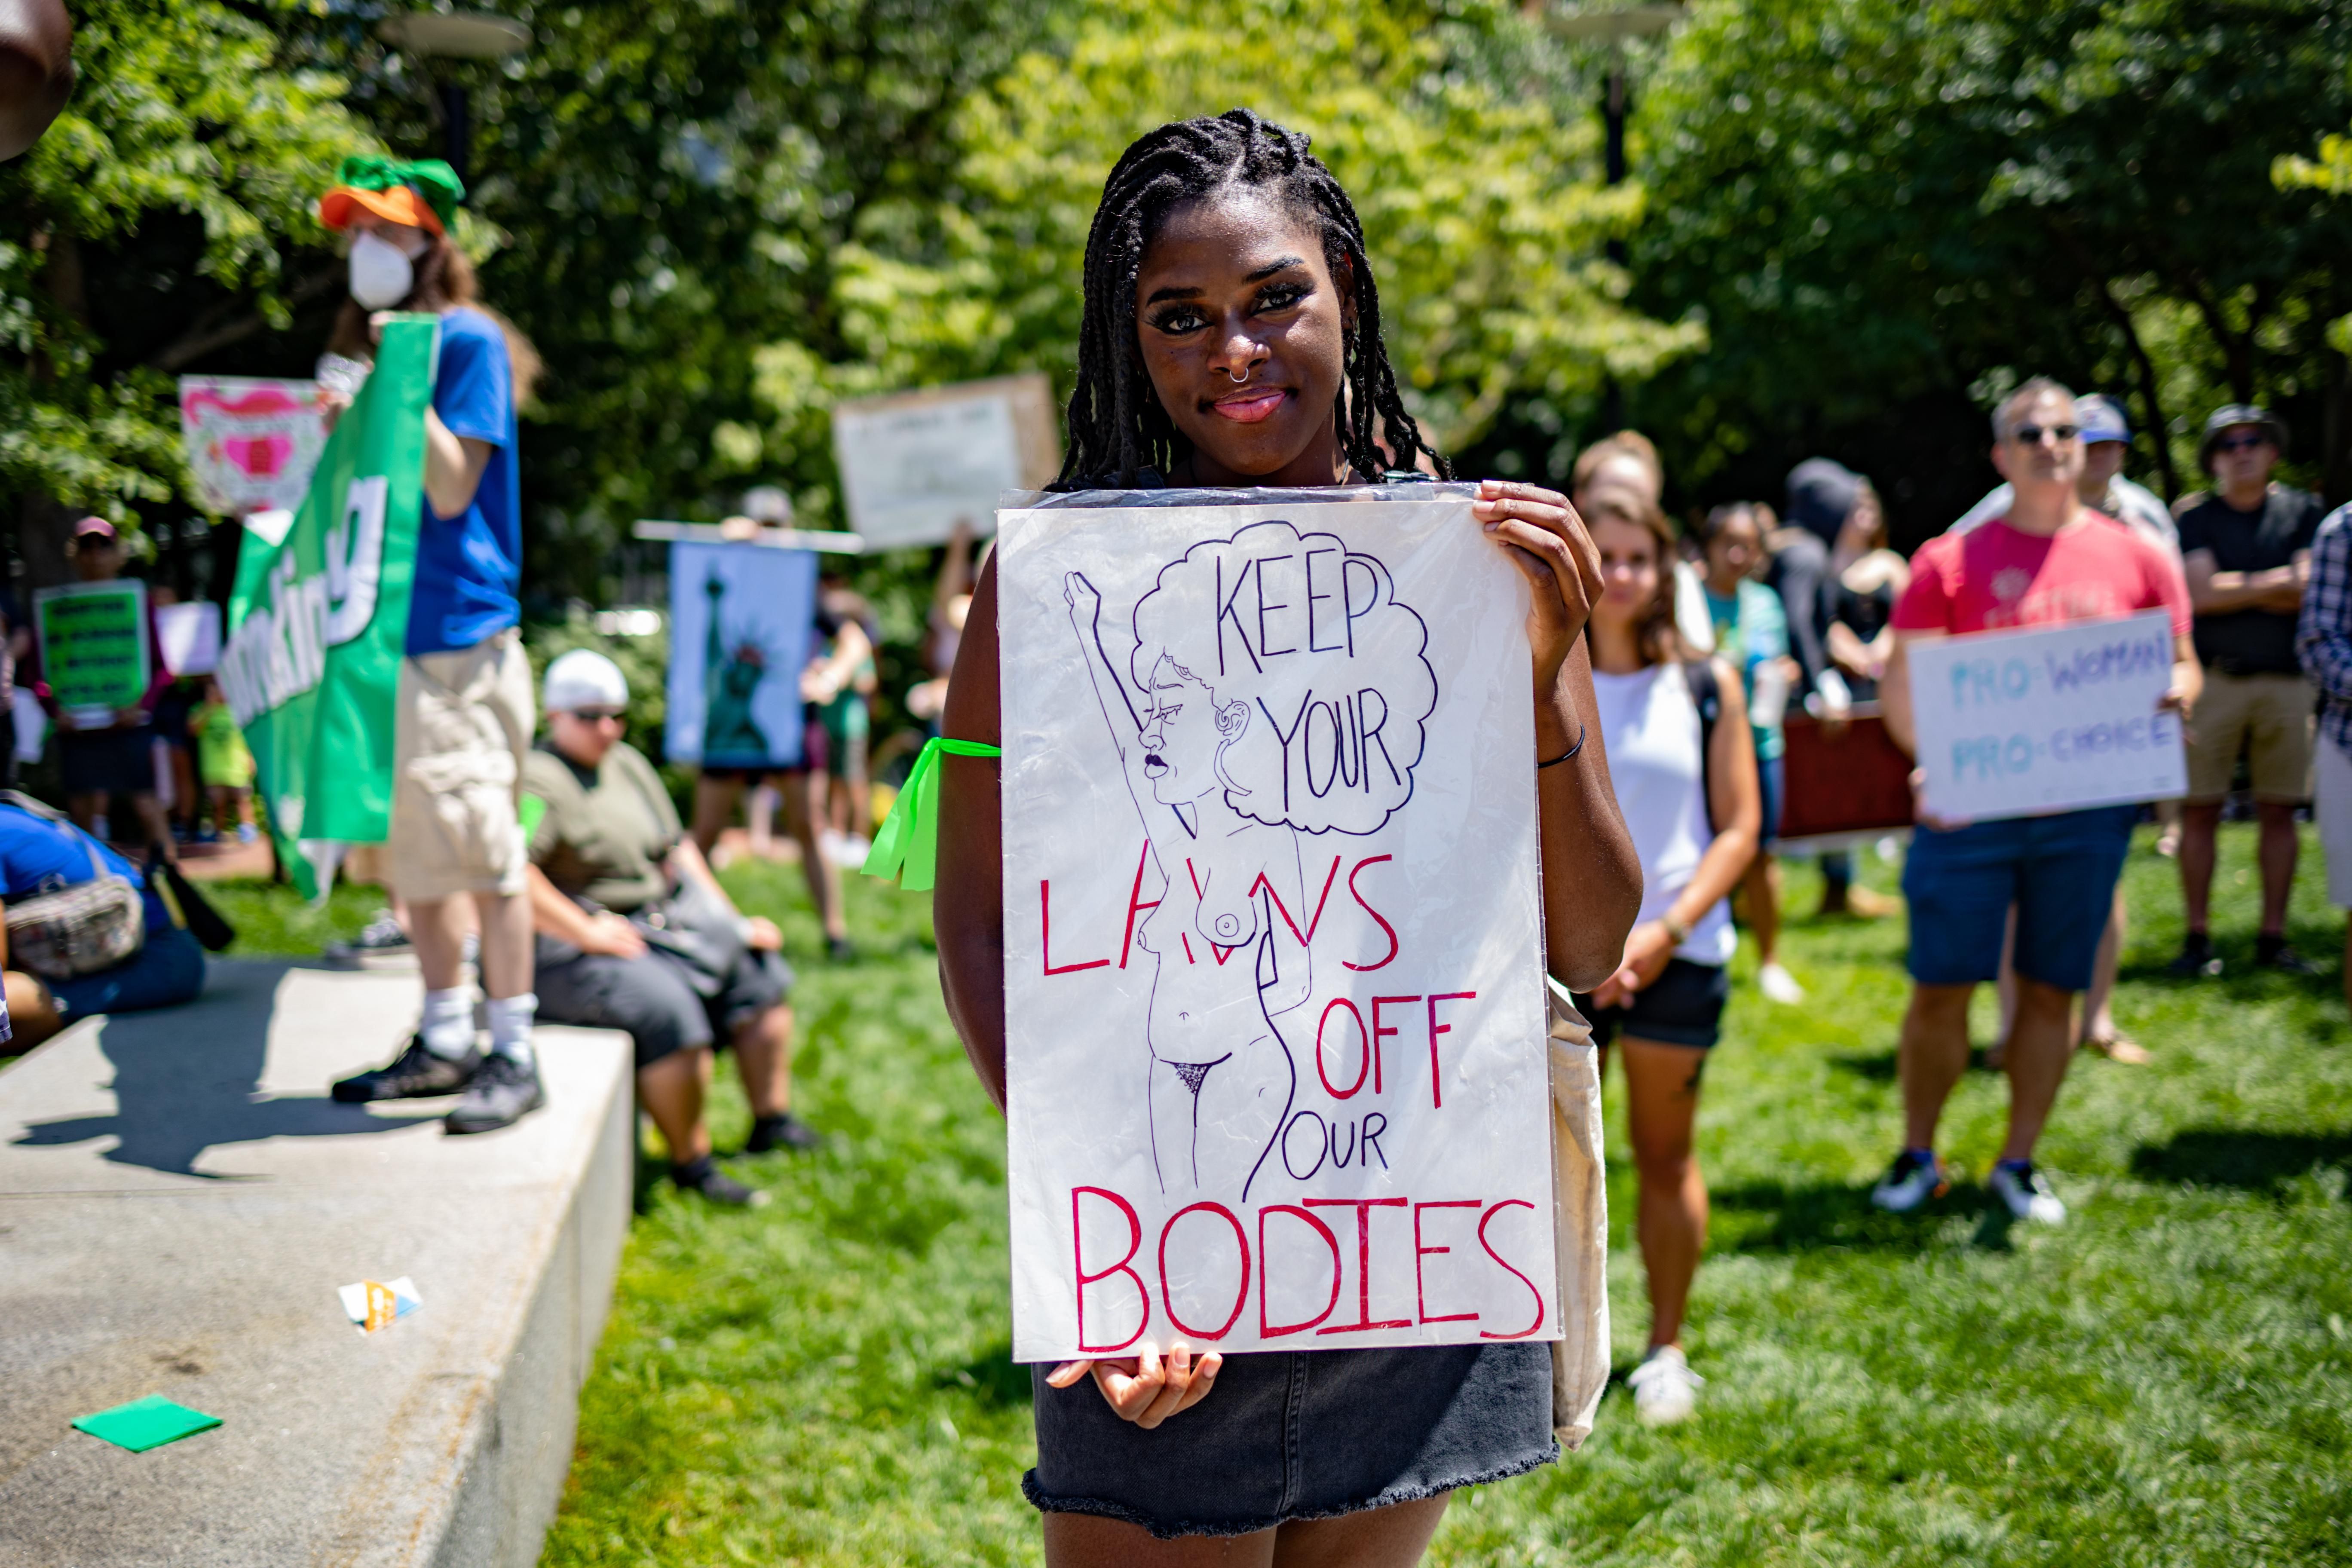 a-black-woman-protester-holding-up-a-sign-during-abortion-protest